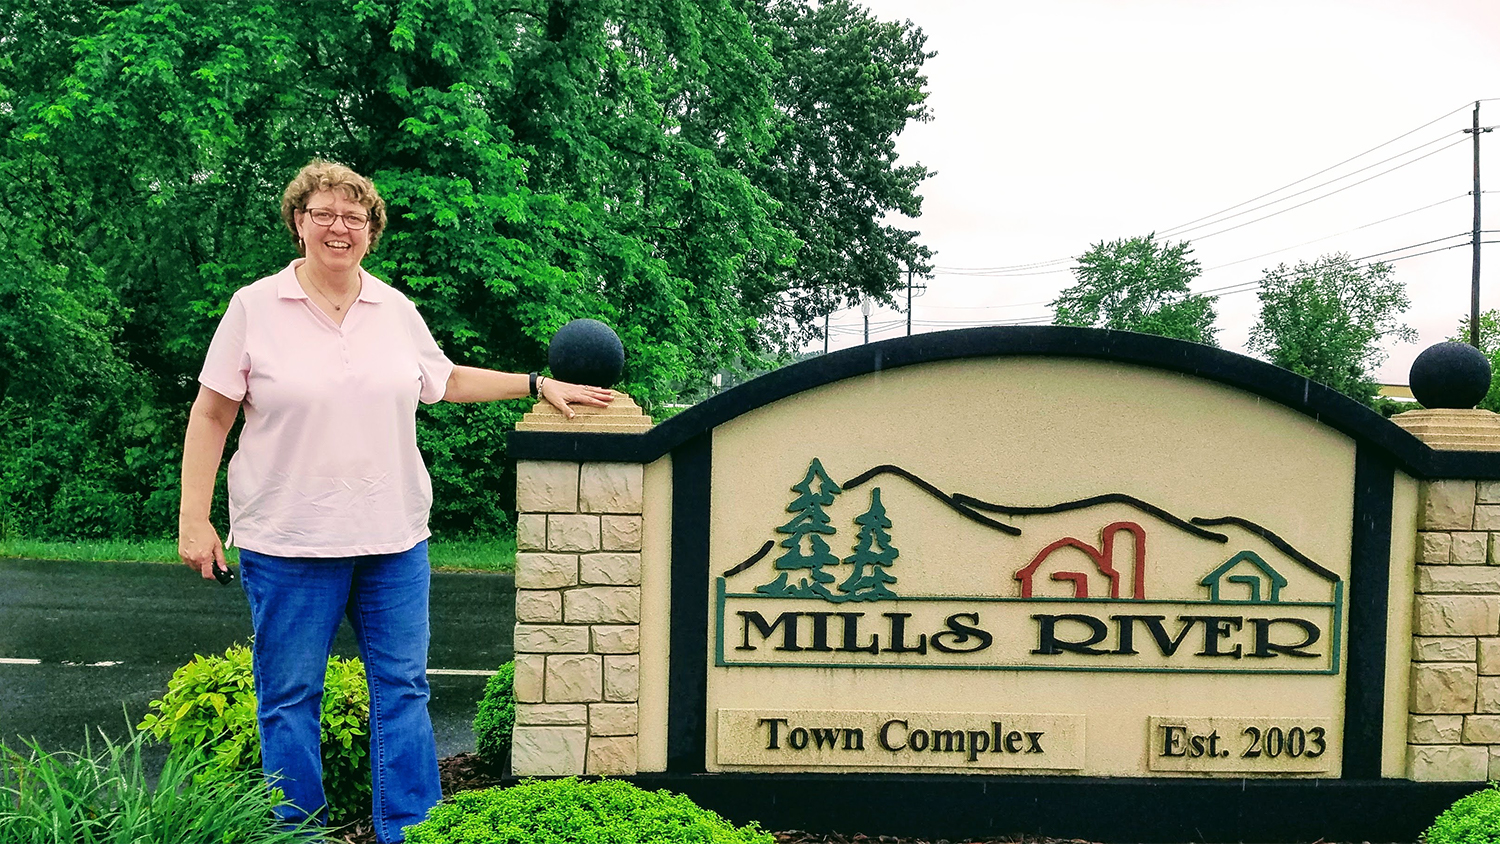 Charlynne stands in front of Town of Mills River sign